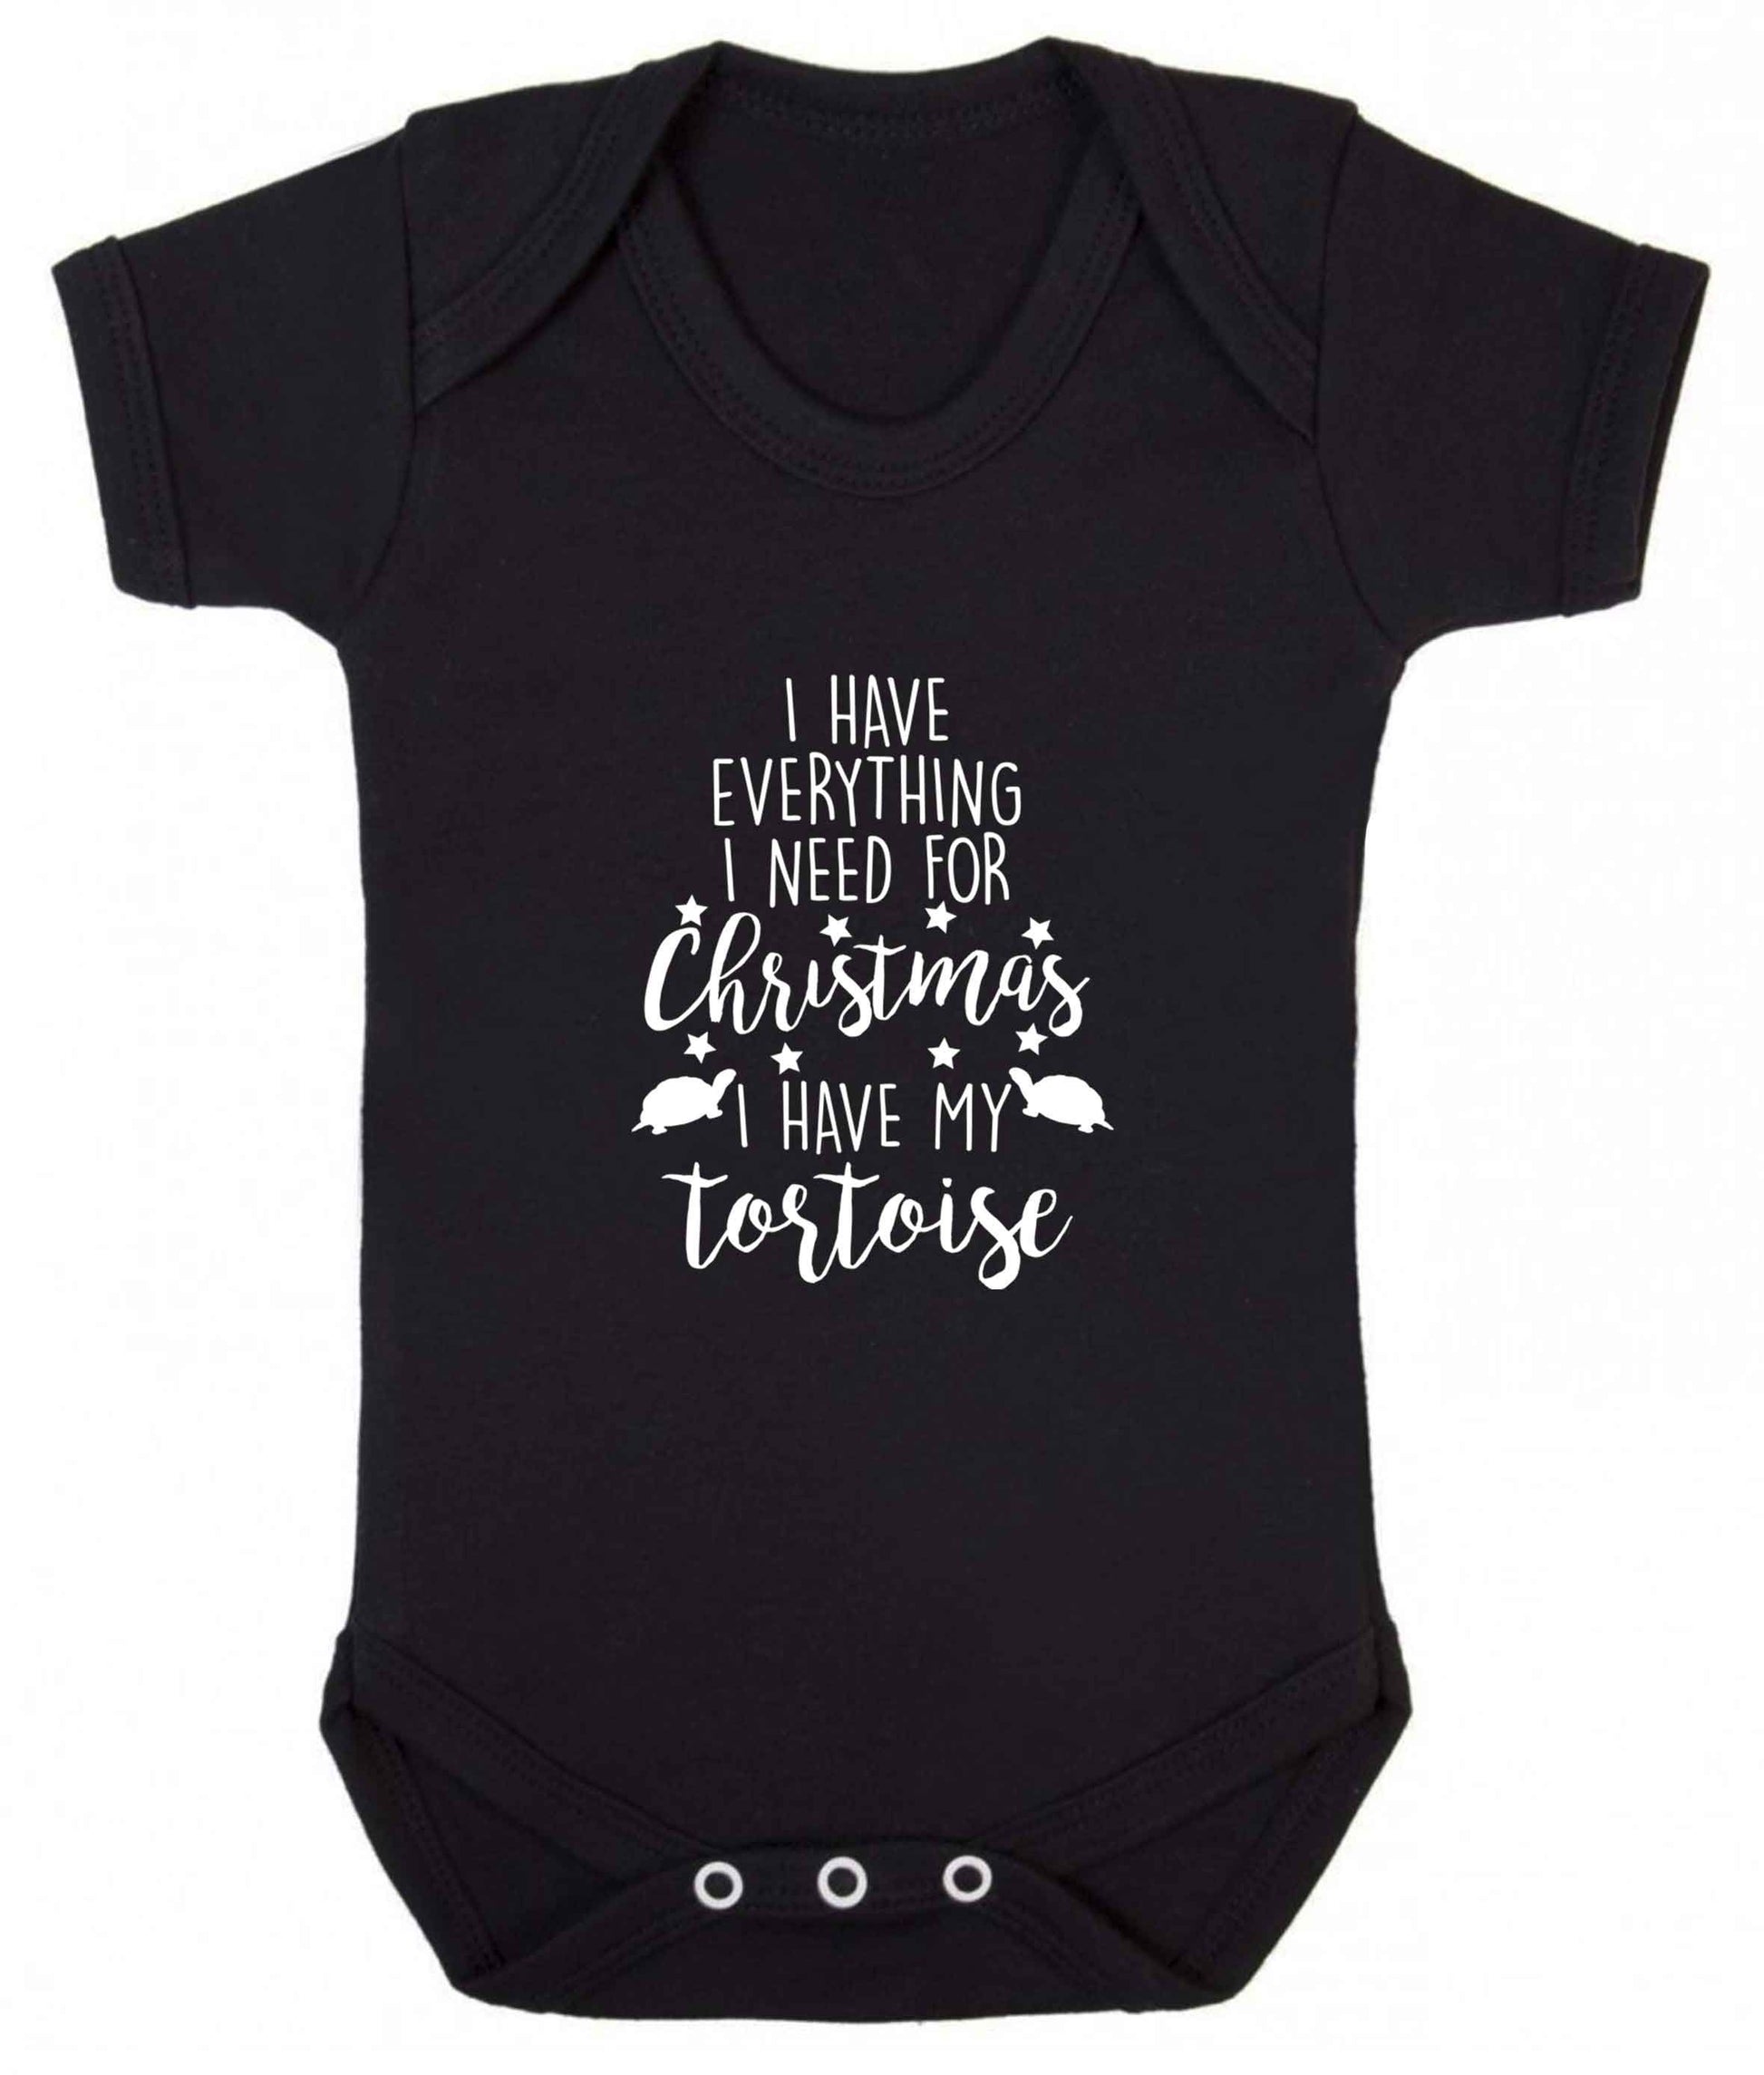 I have everything I need for Christmas I have my tortoise baby vest black 18-24 months